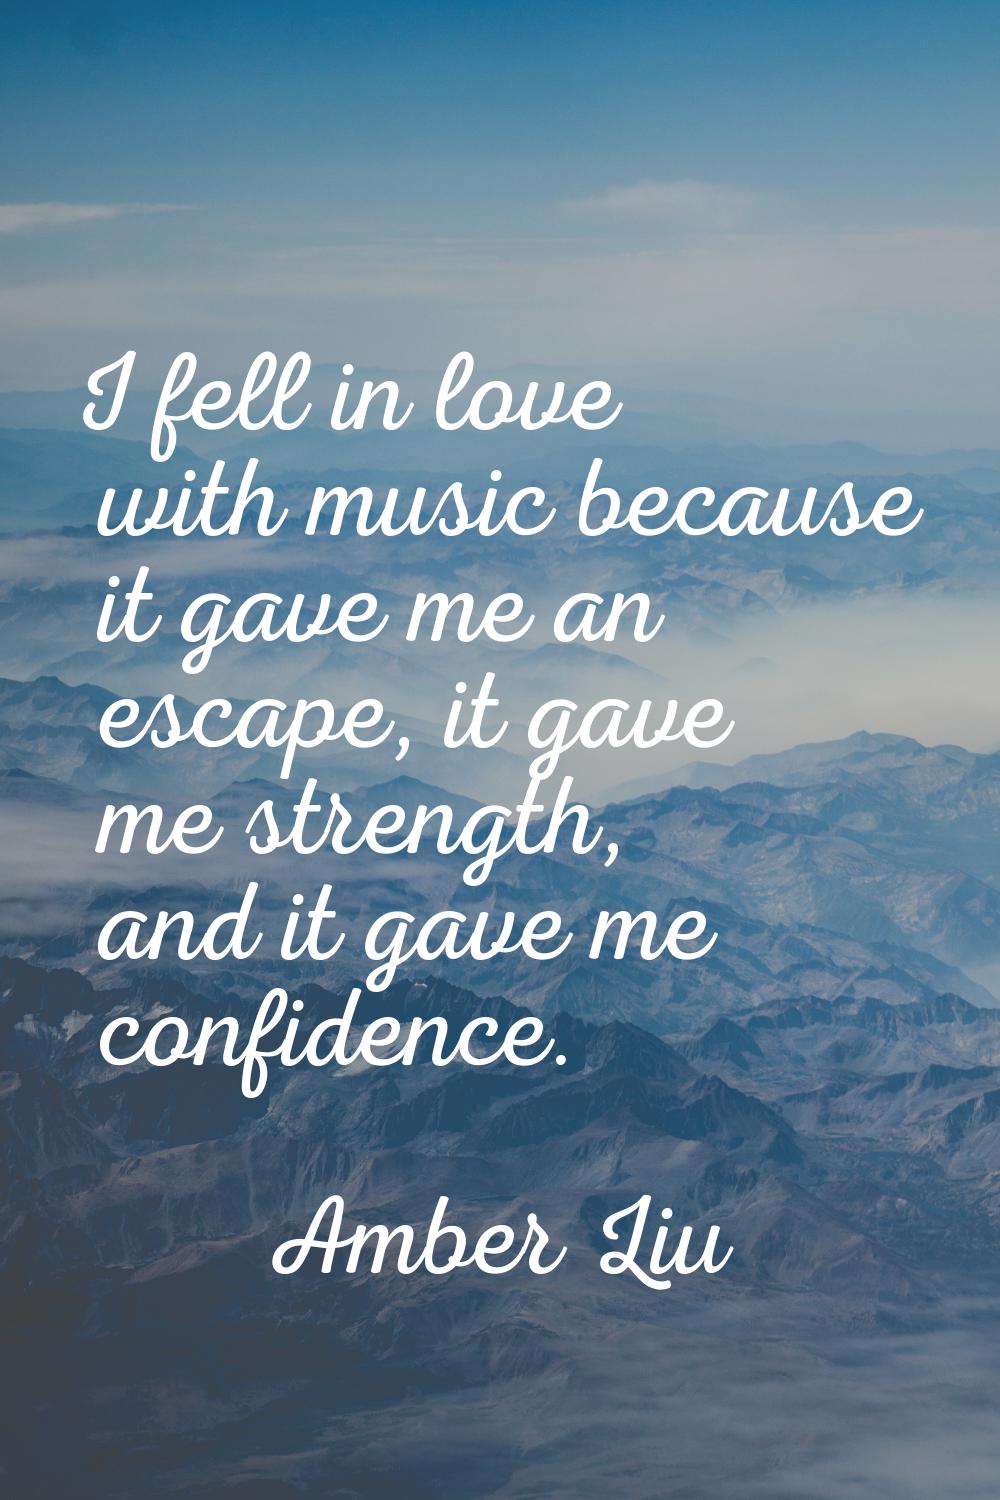 I fell in love with music because it gave me an escape, it gave me strength, and it gave me confide